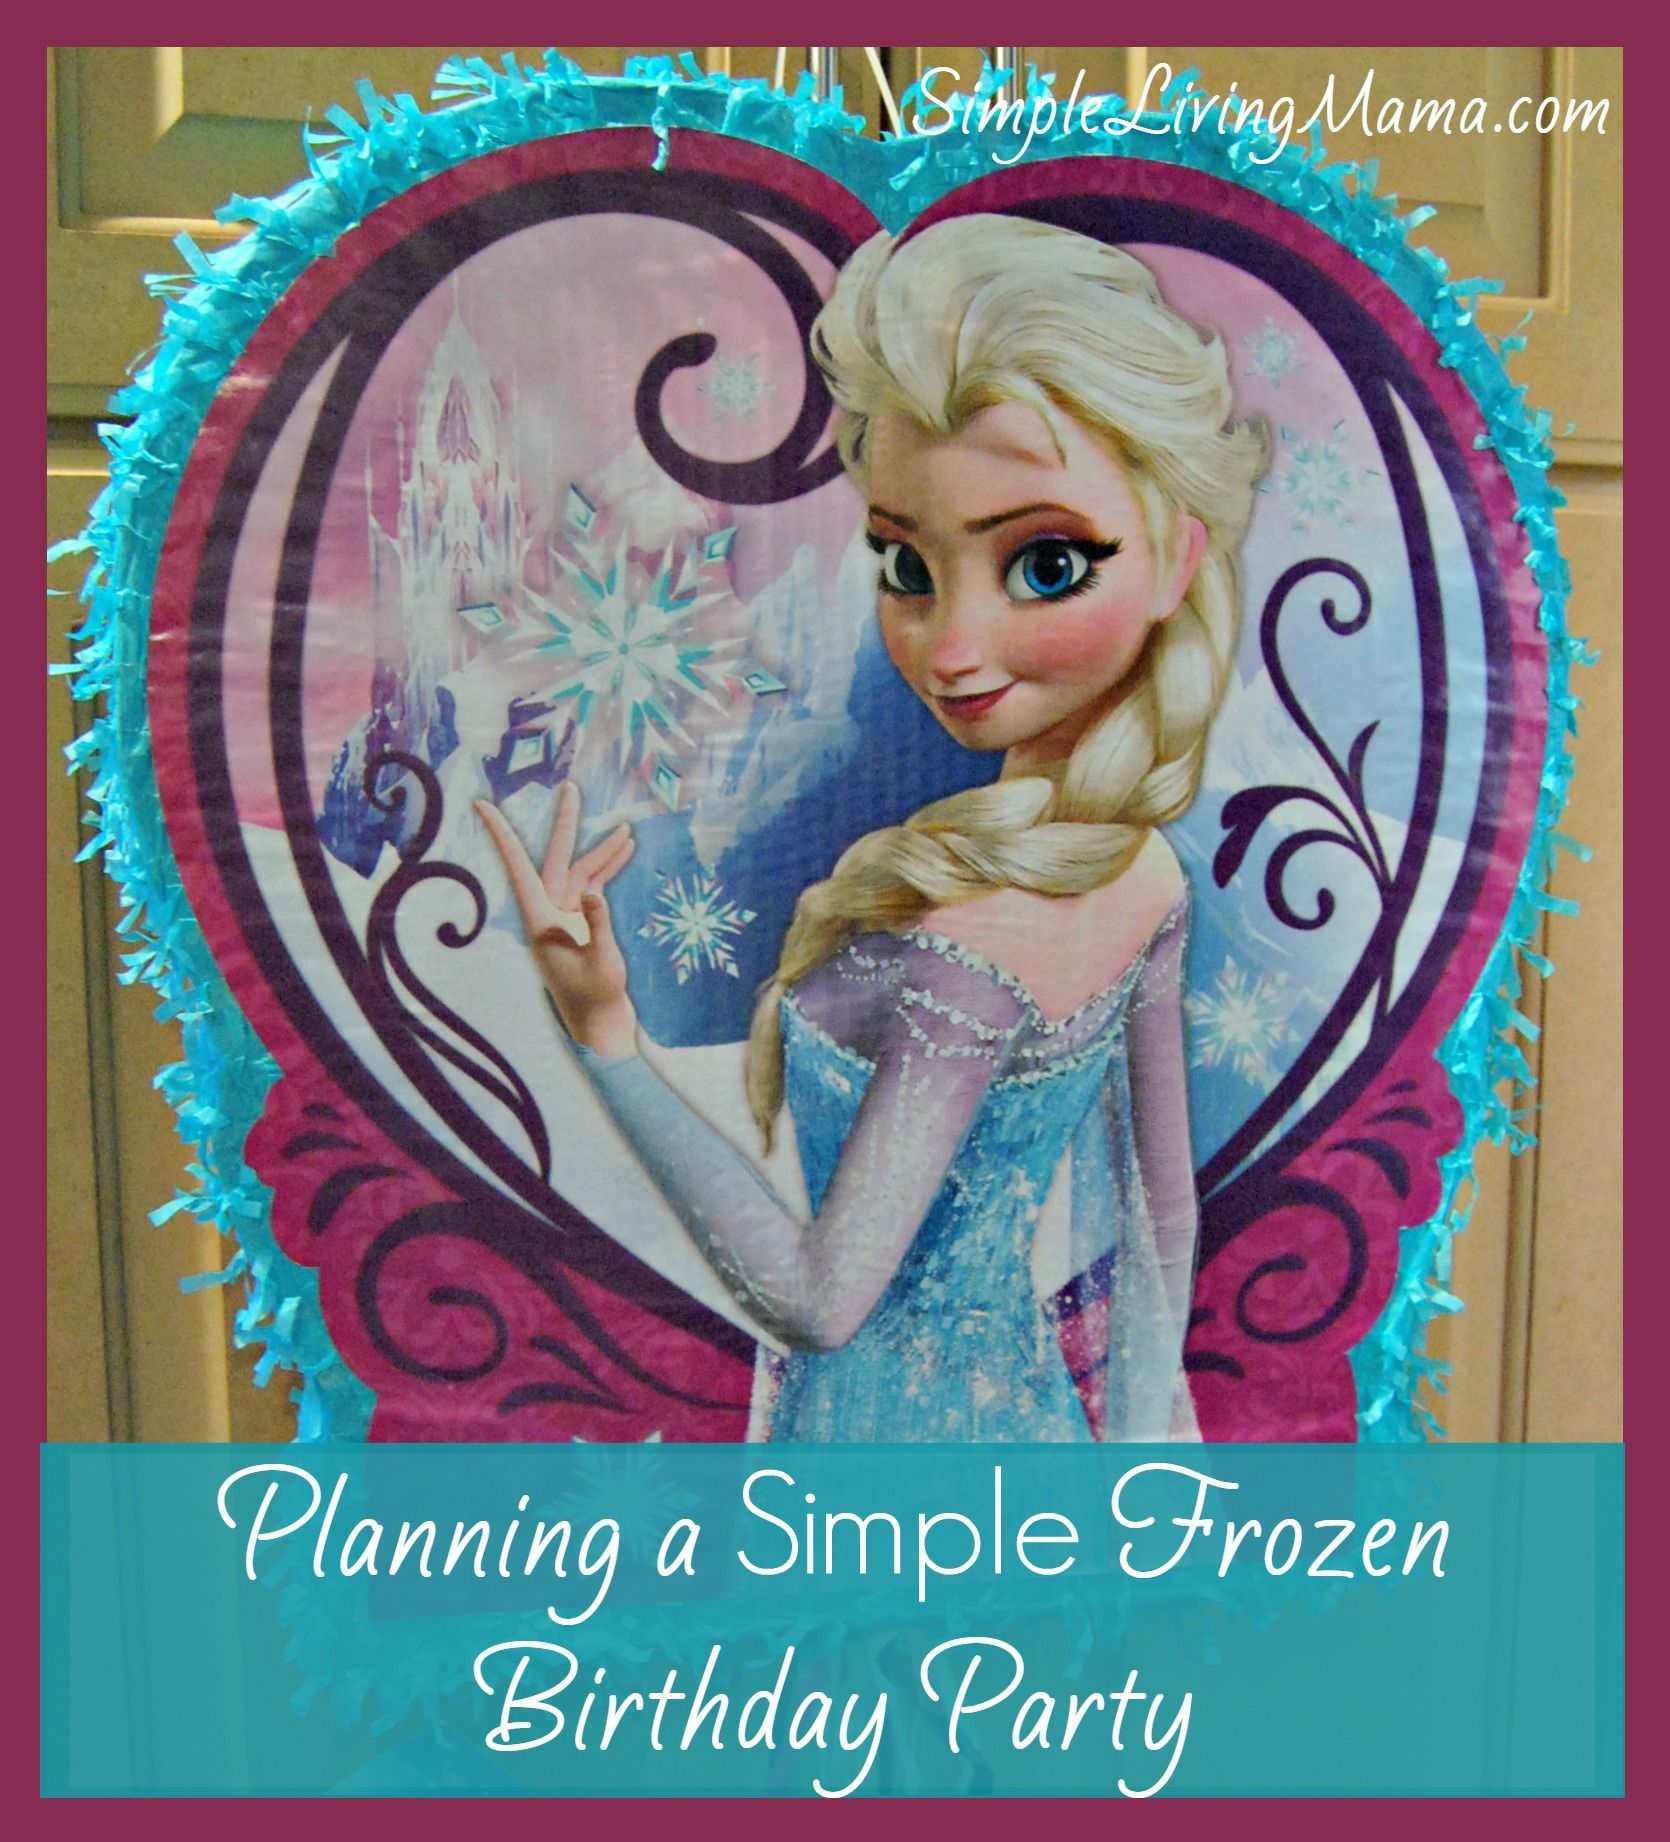 Tips and ideas for planning a simple Frozen birthday party for your little